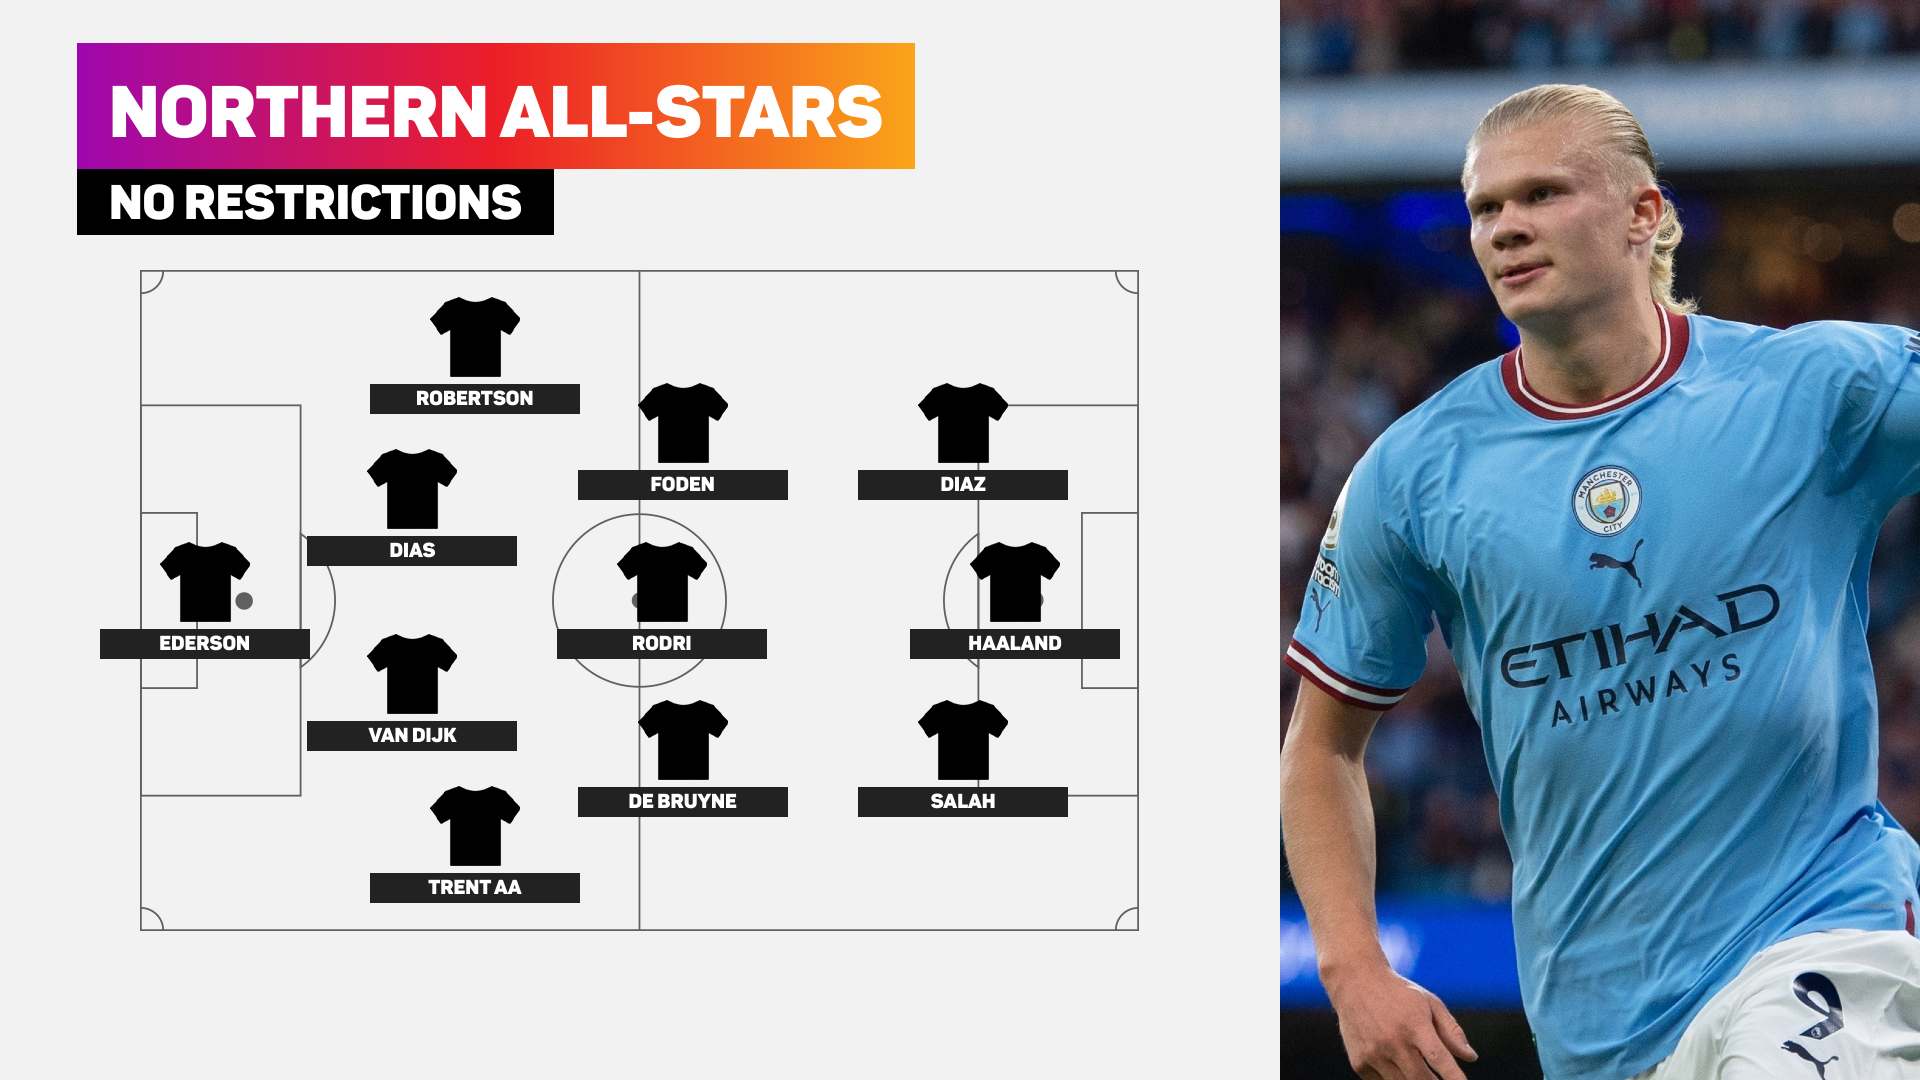 Our Northern All-Stars starting XI is made up entirely of Manchester City and Liverpool players